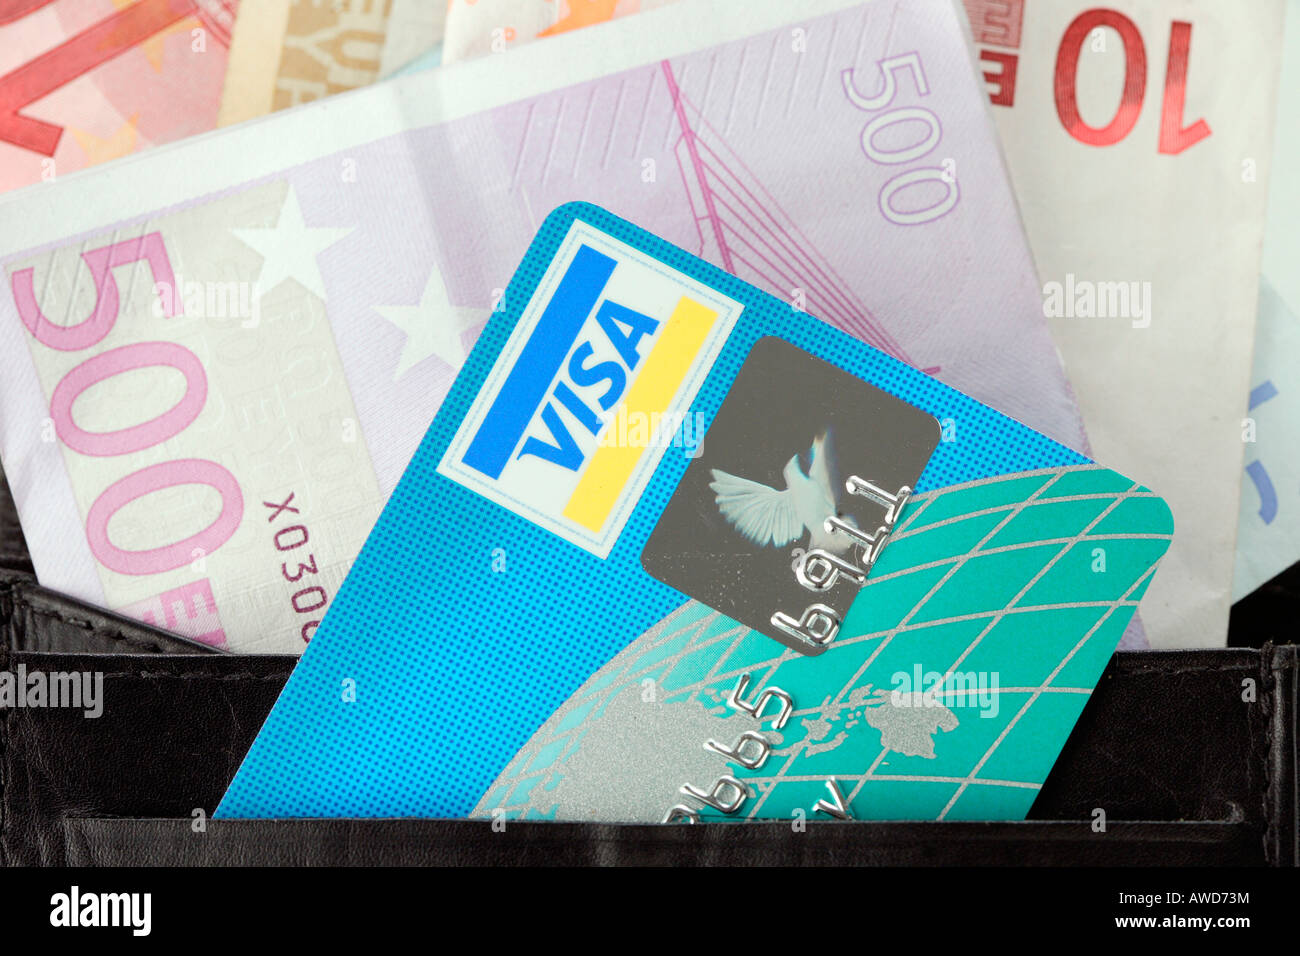 VISA credit card 10 and 500 Euro bank notes in a purse Stock Photo